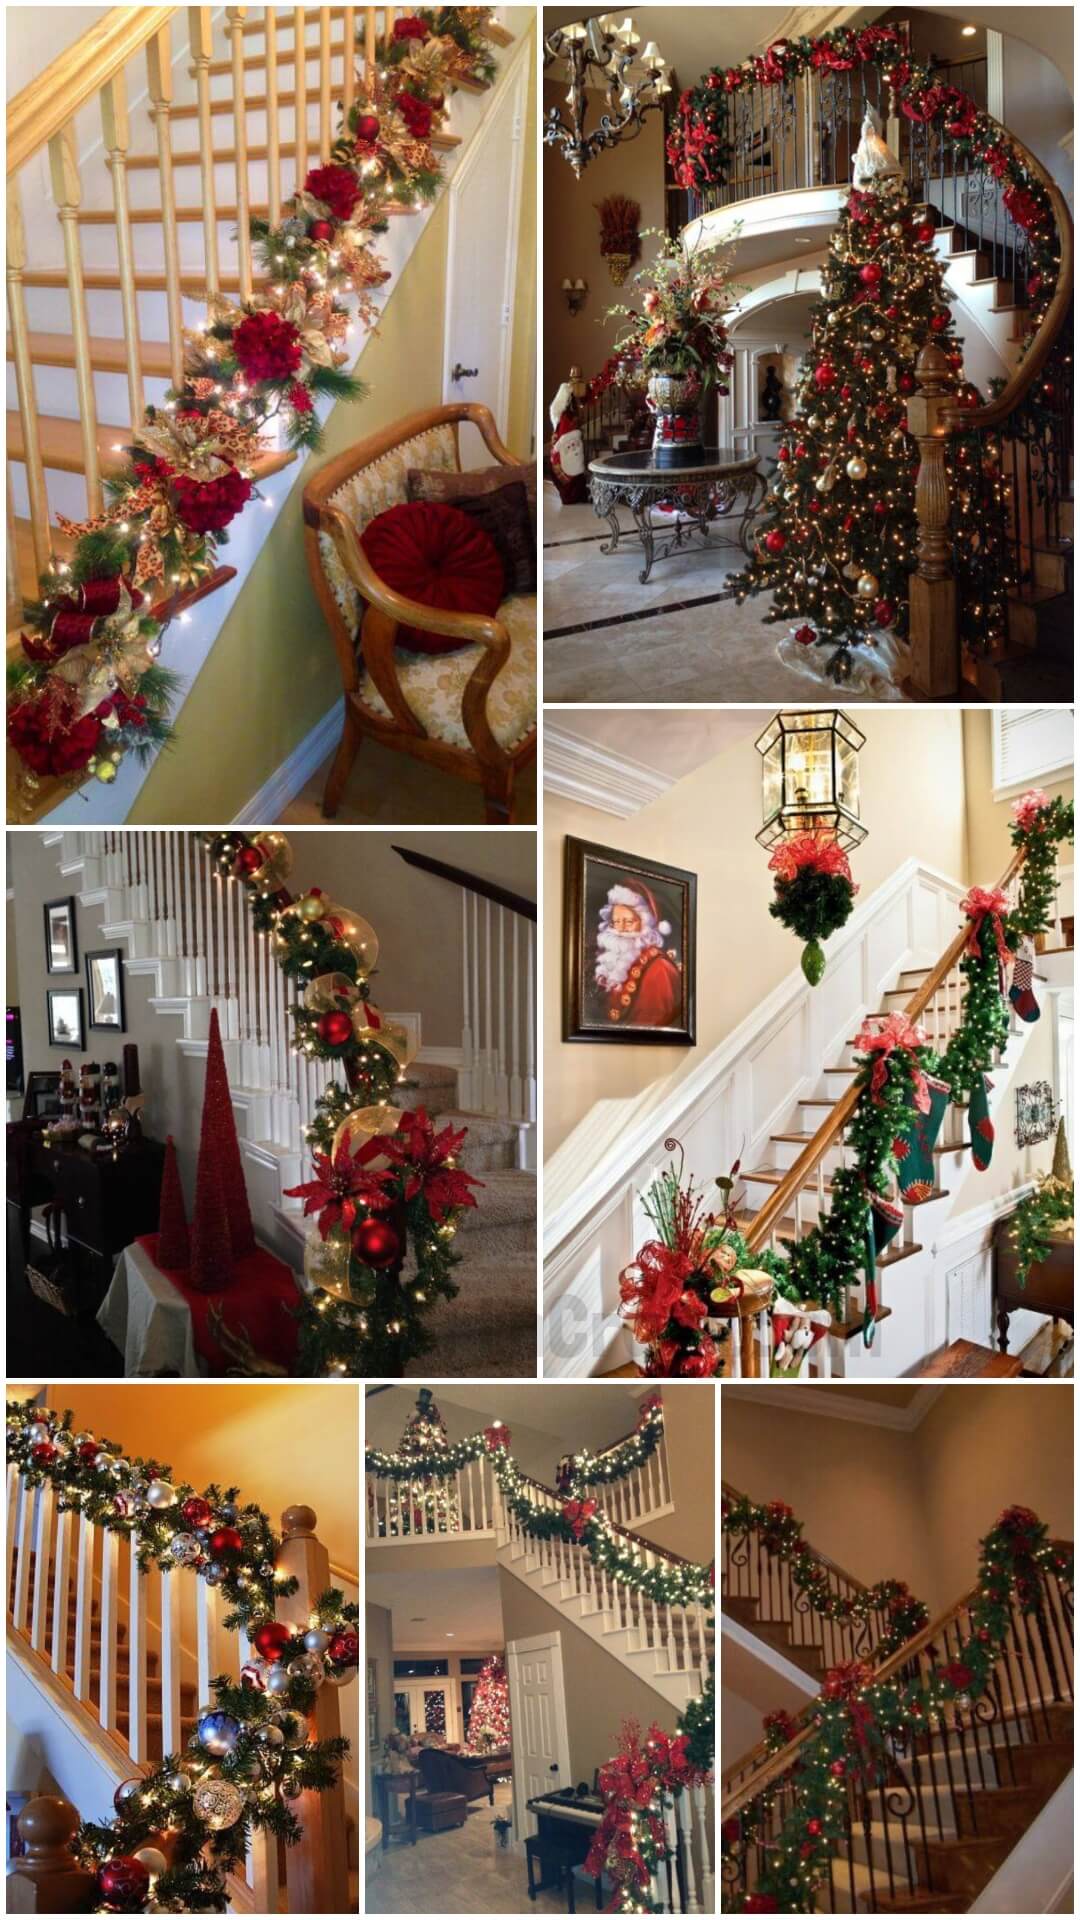 How to Decorate a Staircase on Christmas